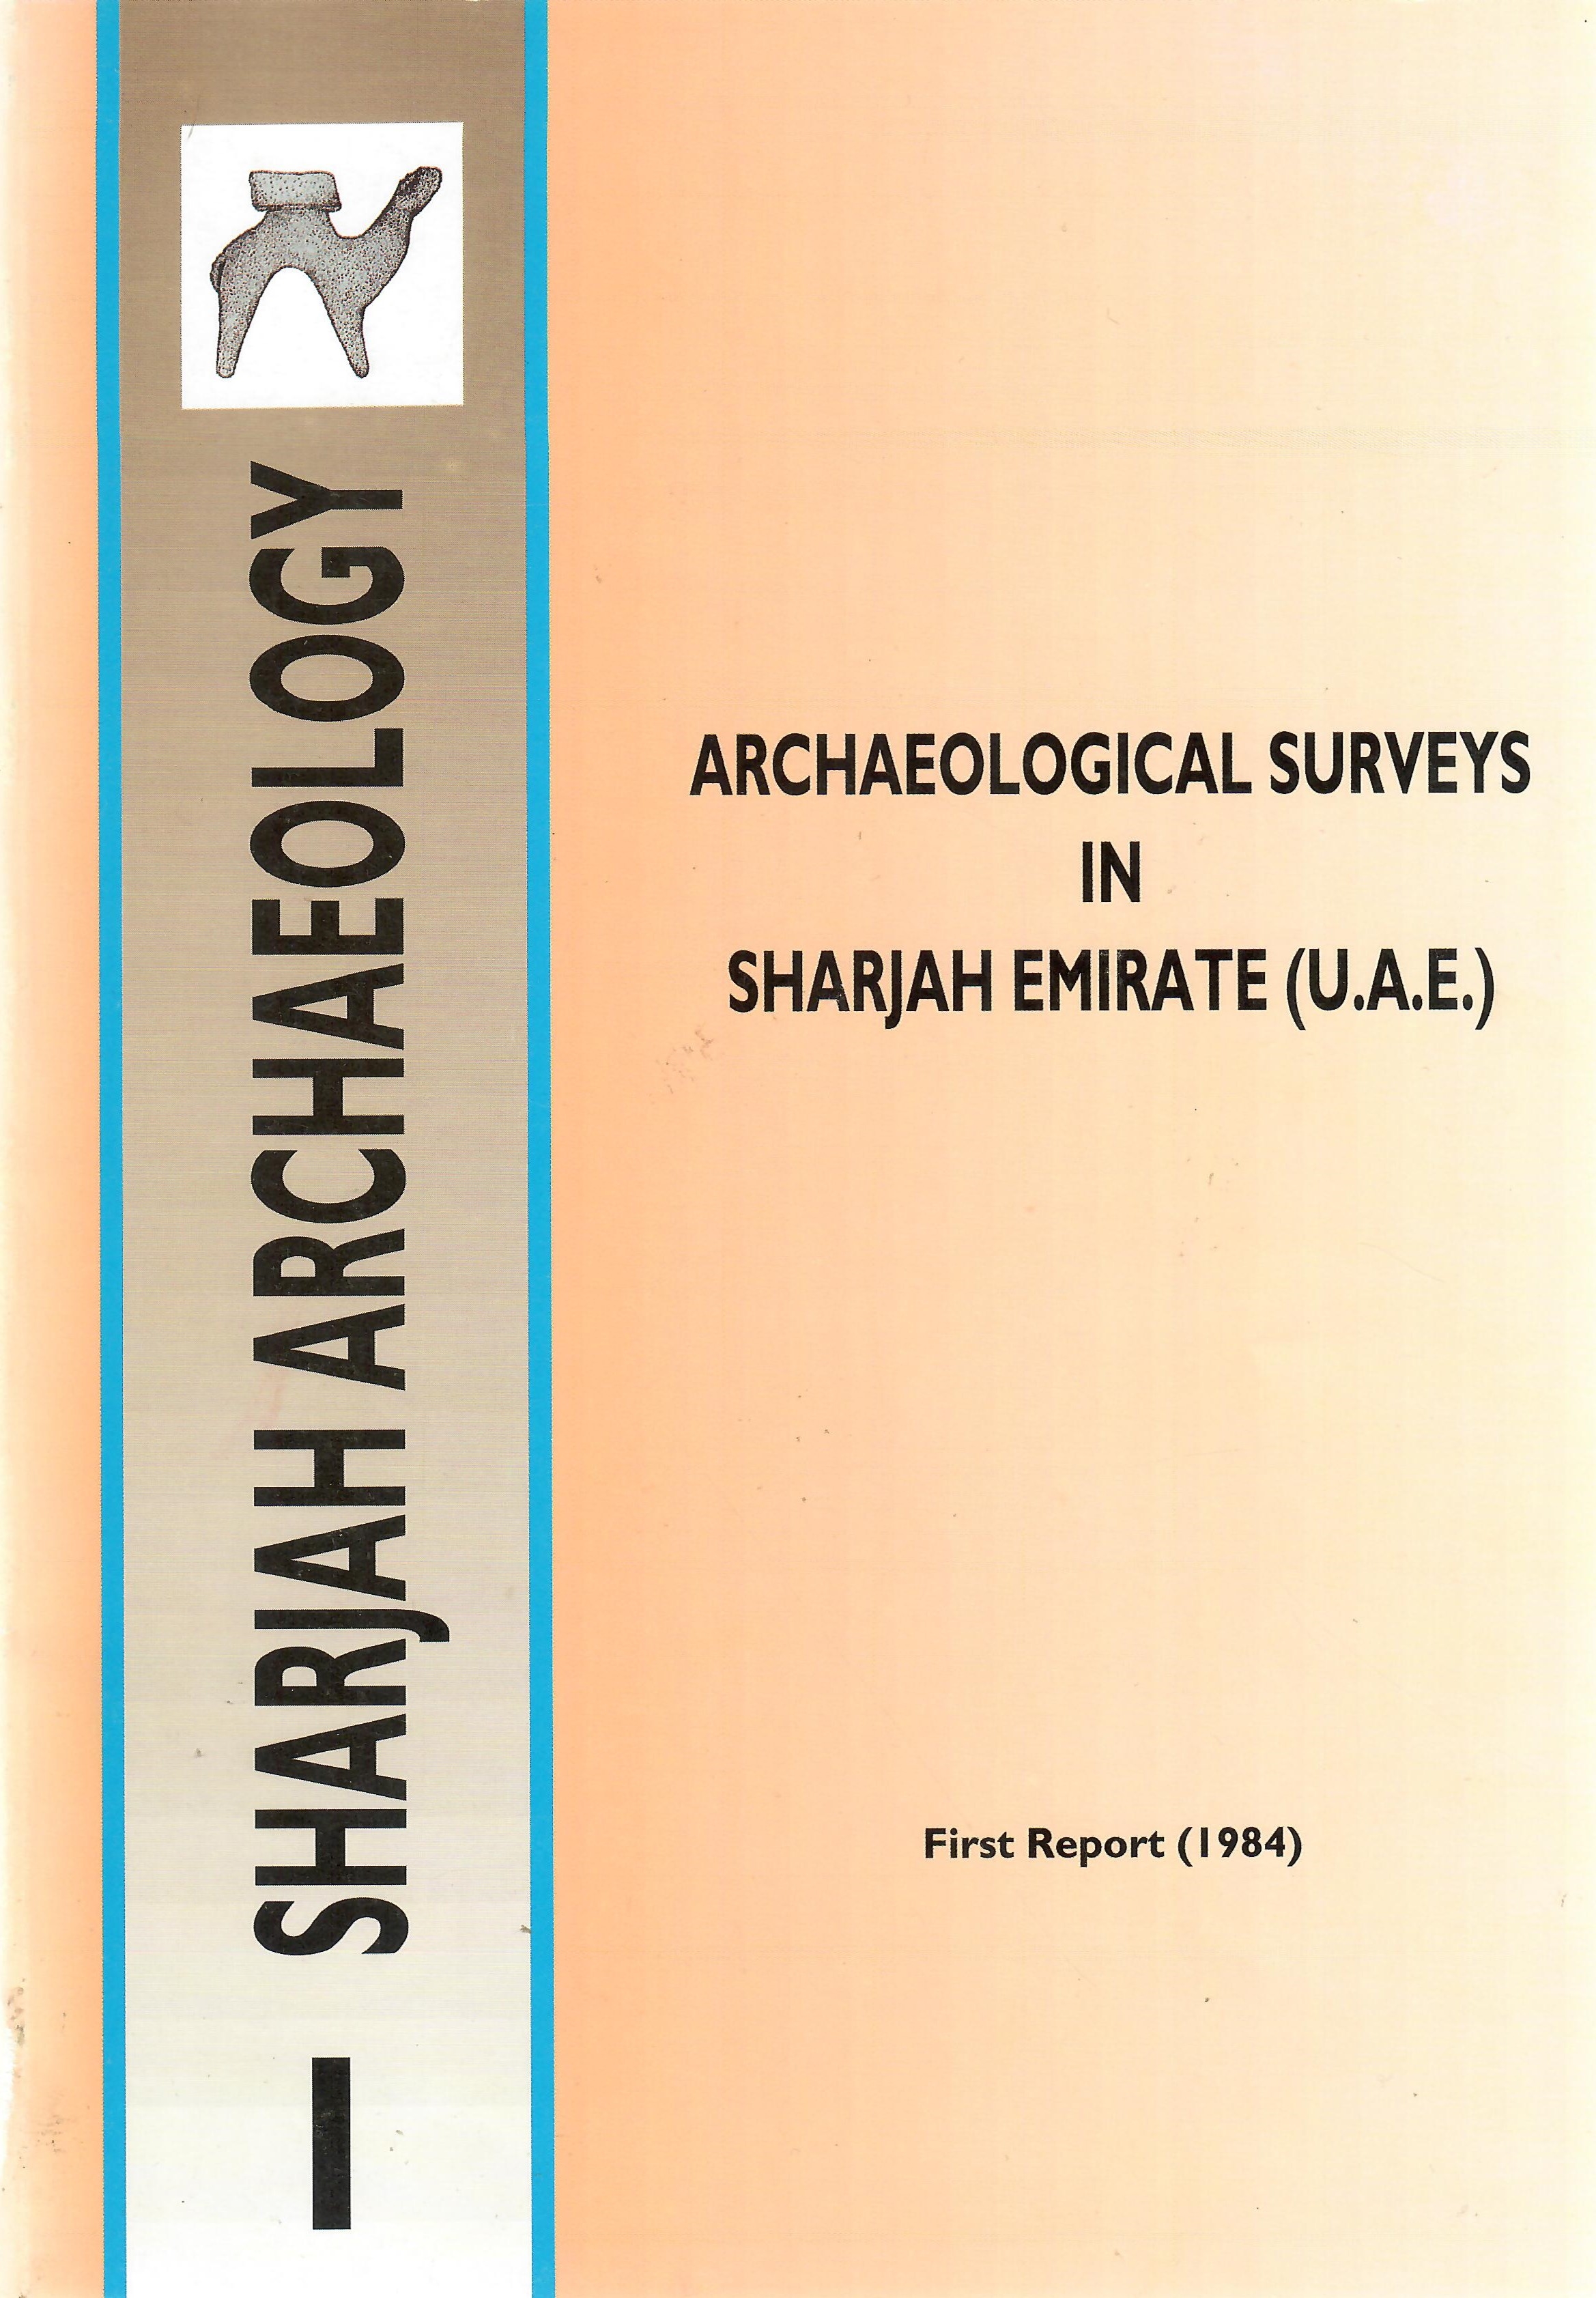 SHARJAH ARCHAEOLOGY FIRST REPORT 1984